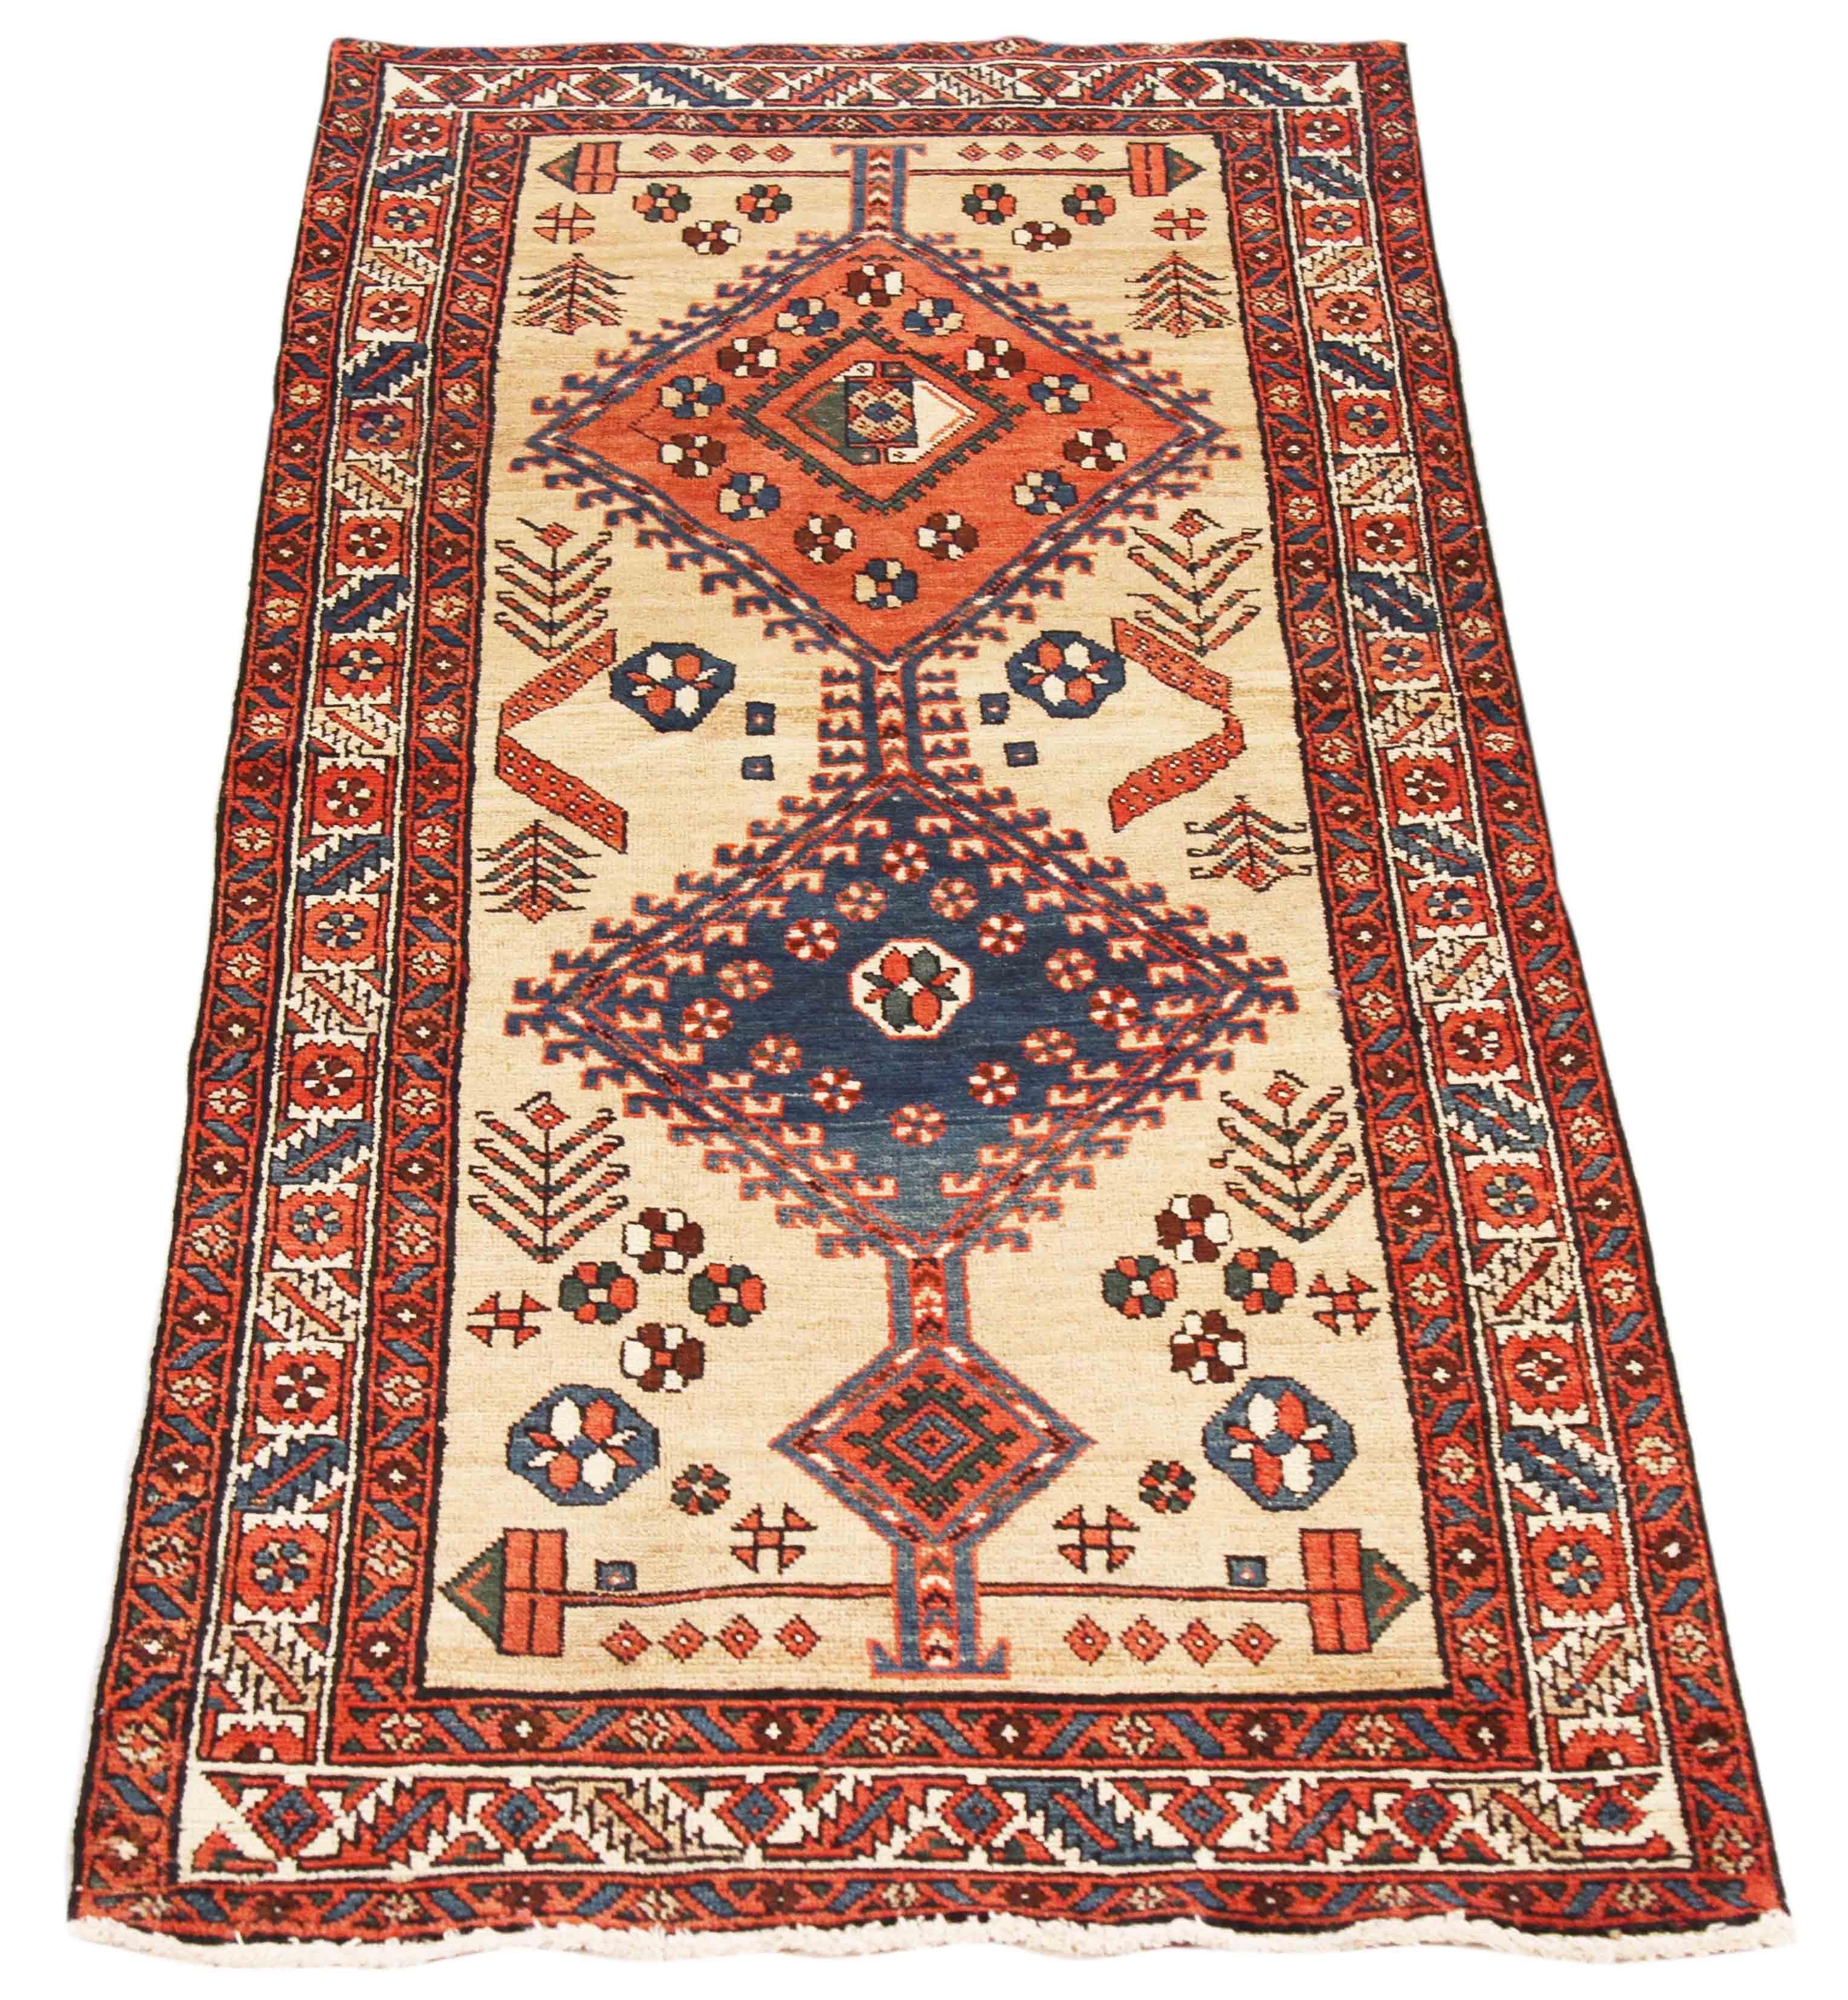 Antique Persian Rug in Azerbaijan Design with Fine Camel Hair Backing In Excellent Condition For Sale In Dallas, TX